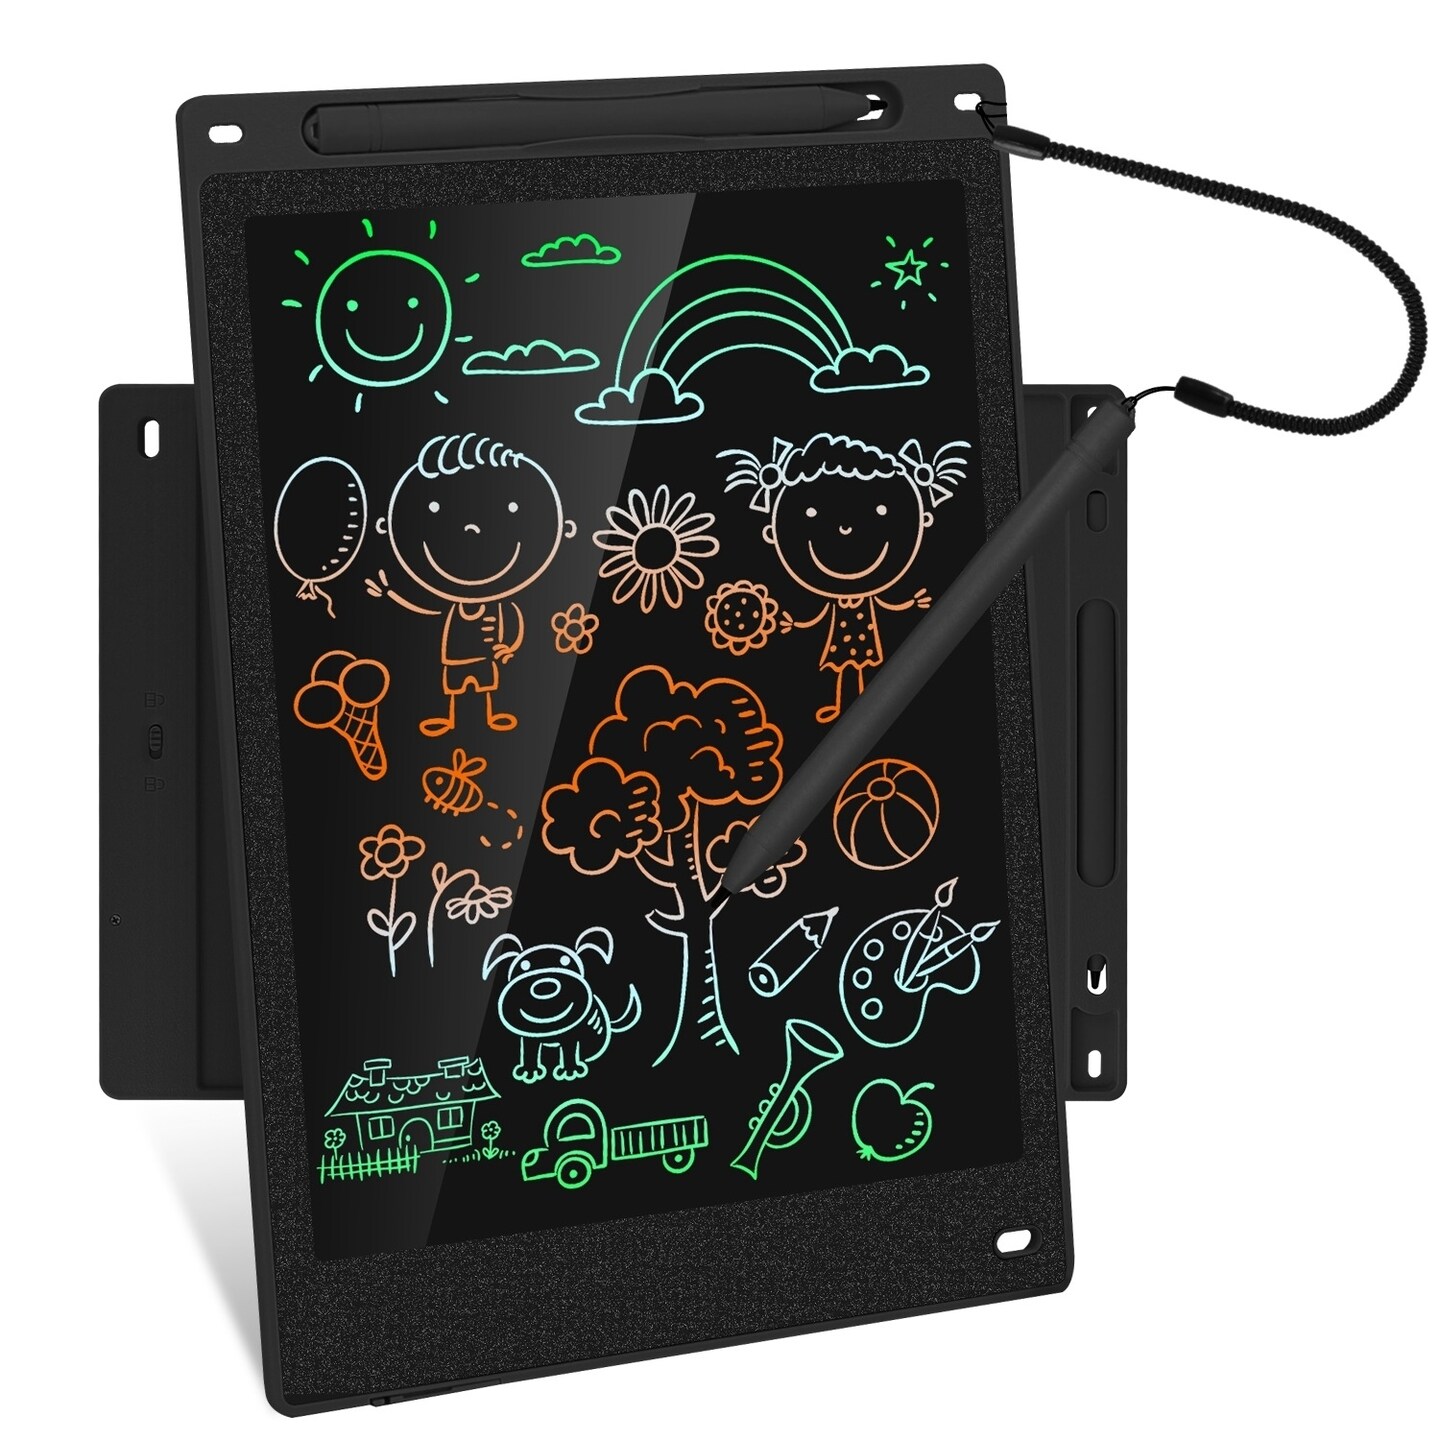 Global Phoenix 10in LCD Writing Tablet Electronic Colorful Graphic Doodle Board Kid Educational Learning Mini Drawing Pad with Lock